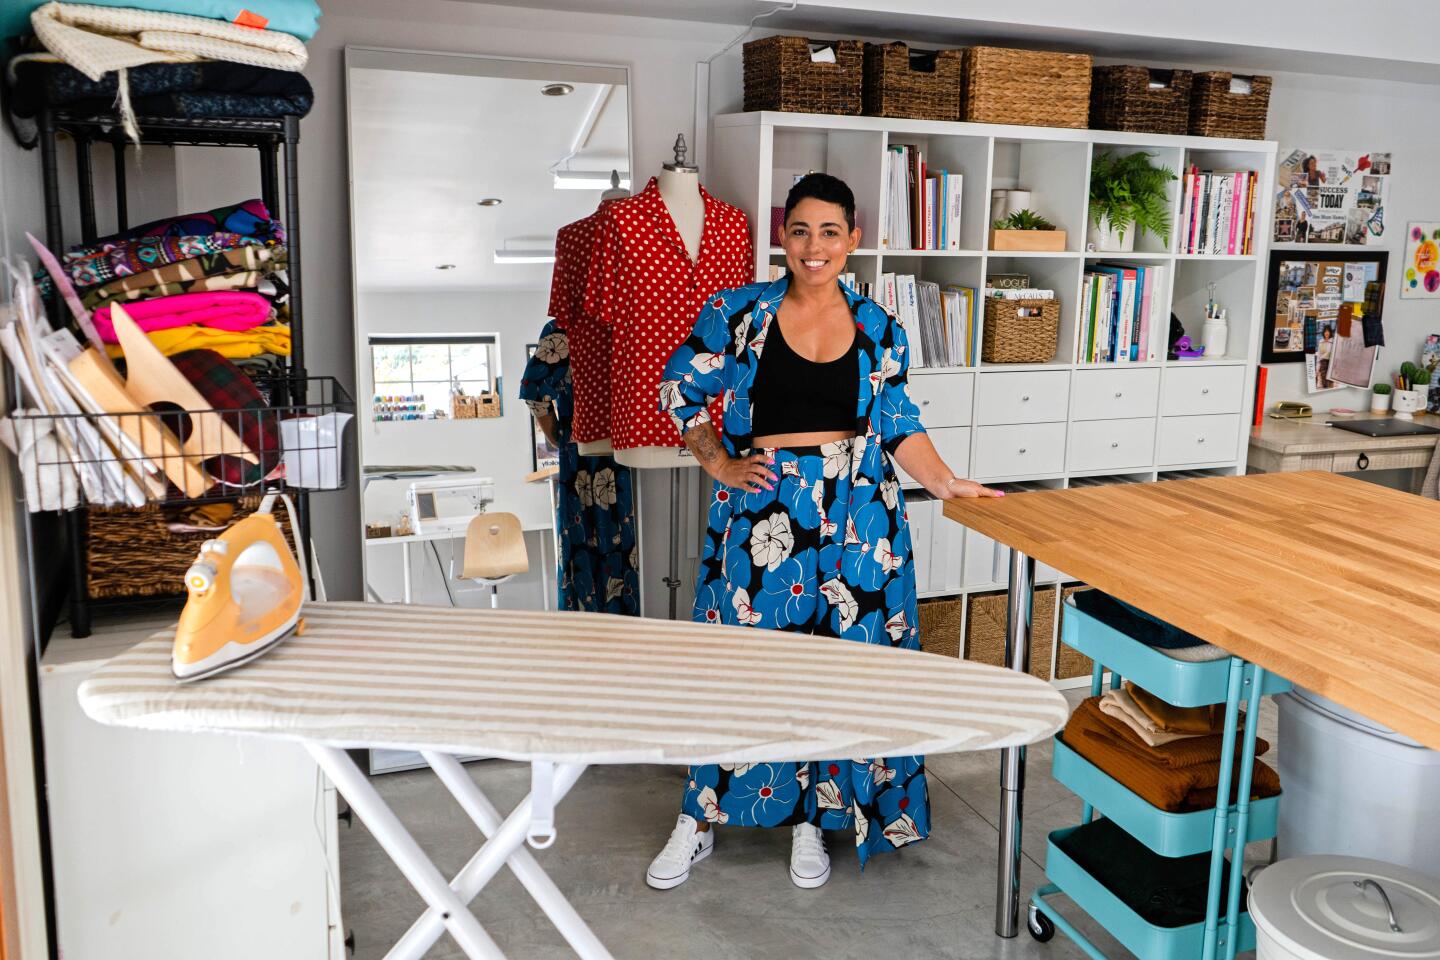 FEB. 28, 2020 - From her sunny home studio in Glendale, Mimi G is building an online sewing empire, one stitch at a time. (Jesse Goddard / For The Times)